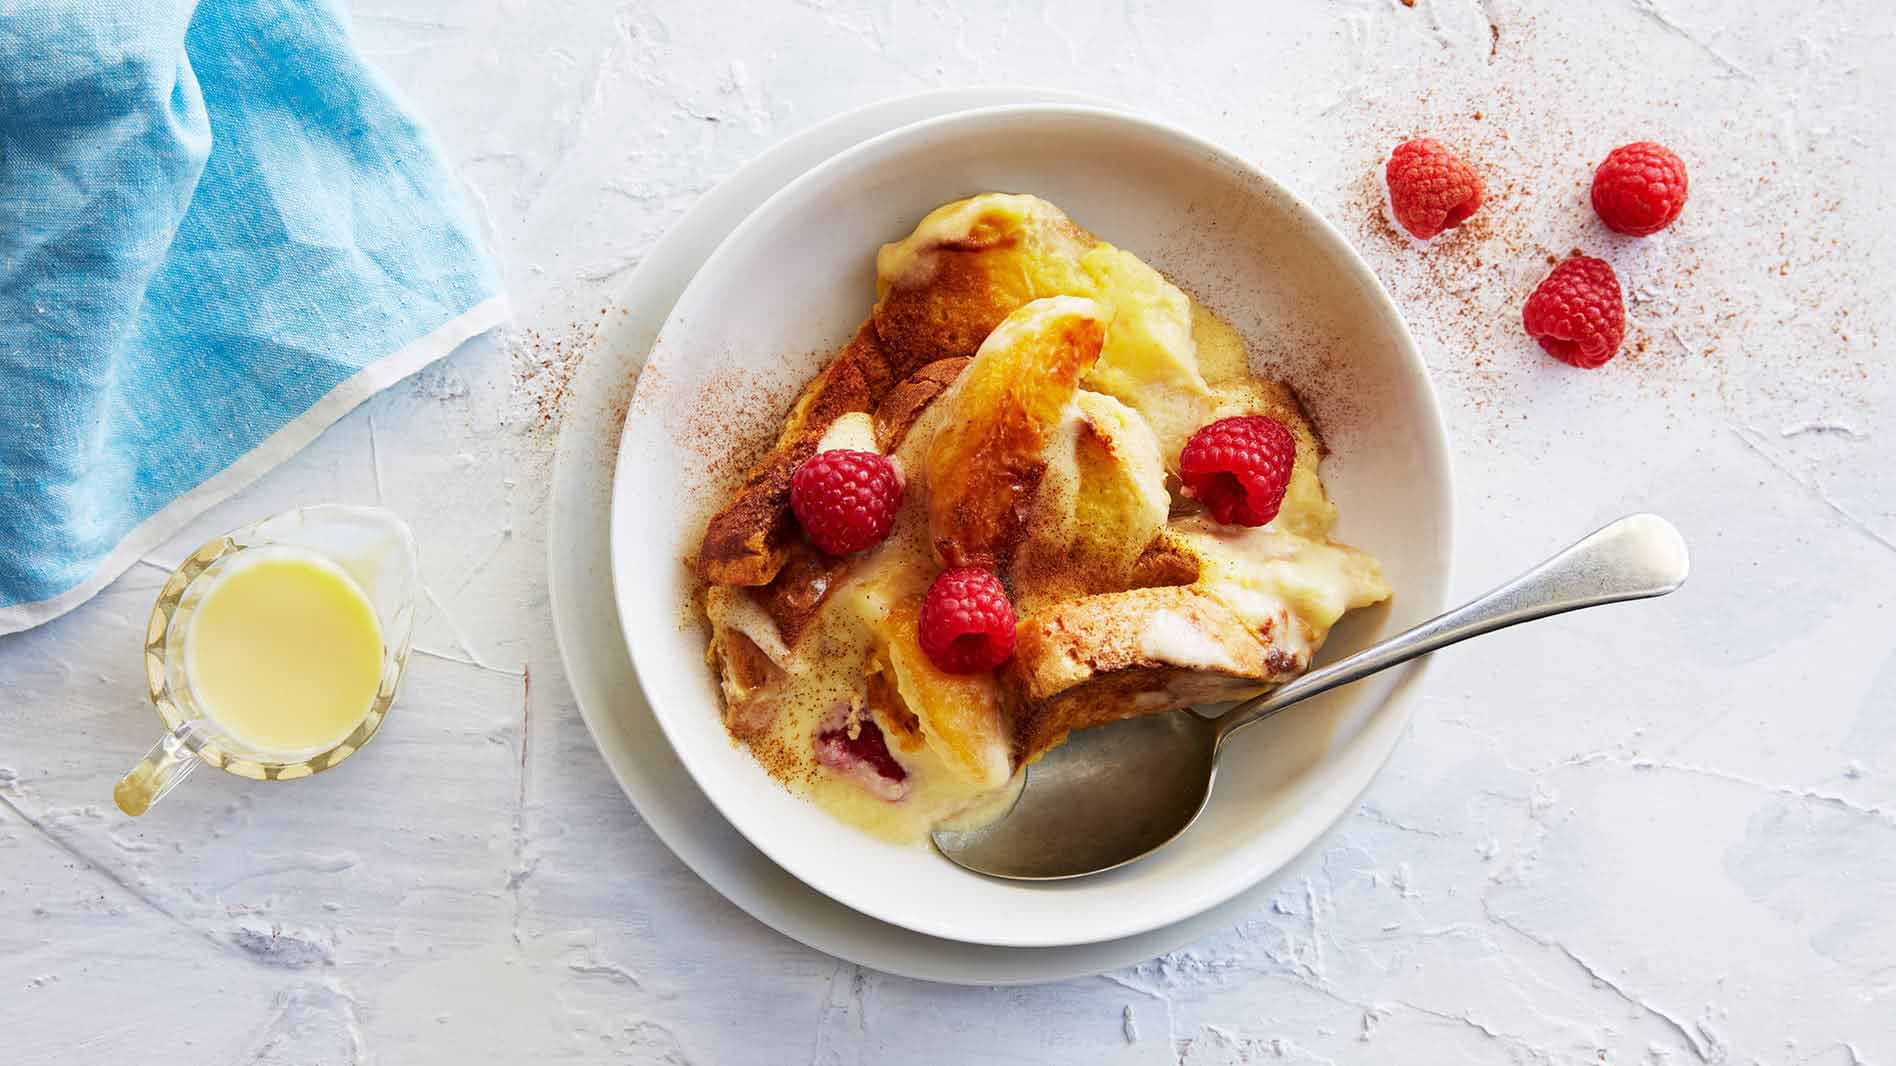 Bread and Butter Pudding with Peaches and Raspberries